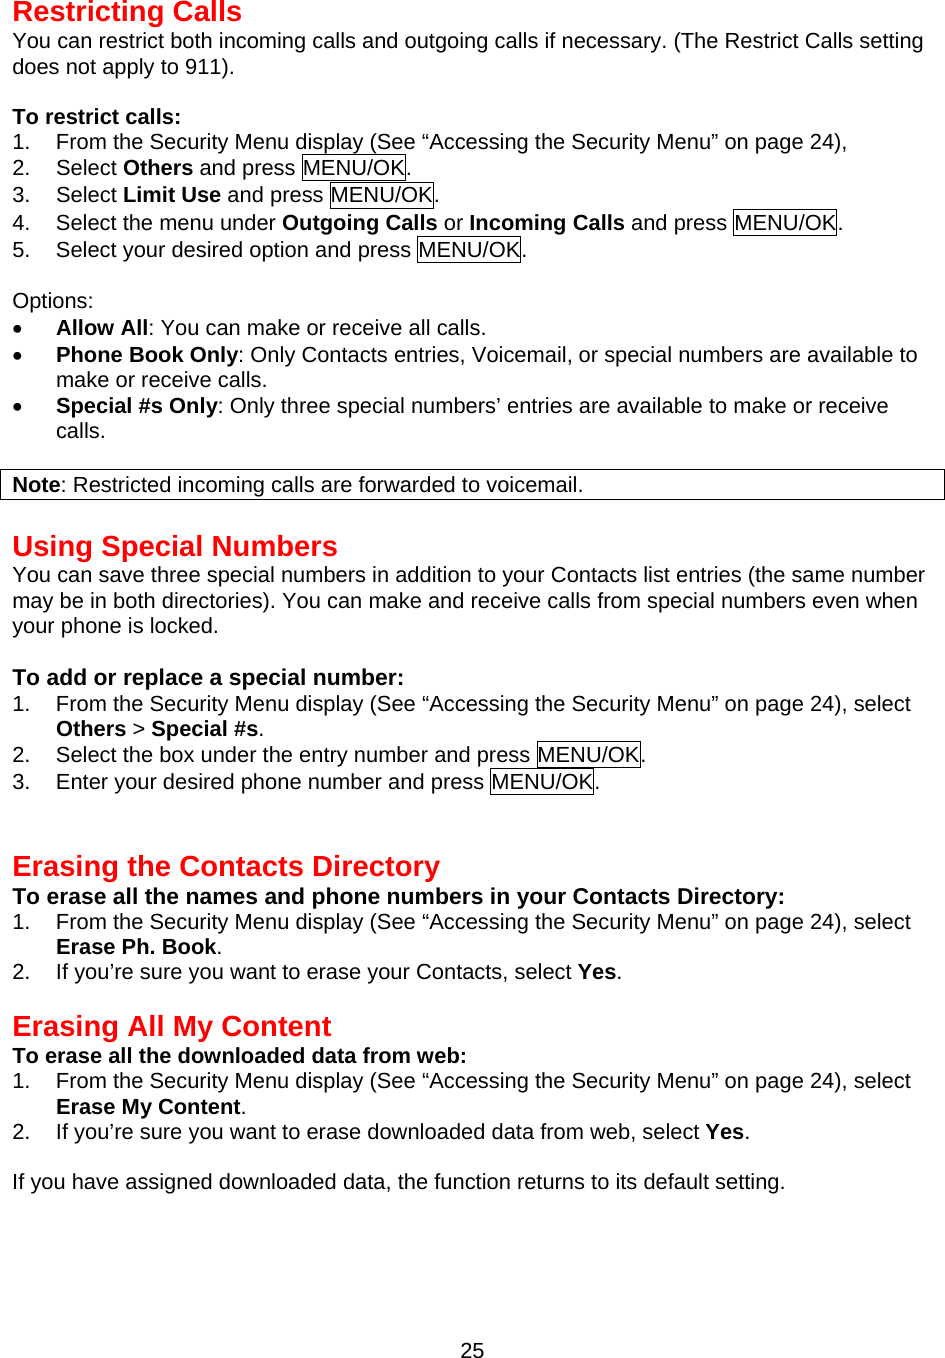  25Restricting Calls You can restrict both incoming calls and outgoing calls if necessary. (The Restrict Calls setting does not apply to 911).  To restrict calls: 1.  From the Security Menu display (See “Accessing the Security Menu” on page 24), 2. Select Others and press MENU/OK. 3. Select Limit Use and press MENU/OK. 4.  Select the menu under Outgoing Calls or Incoming Calls and press MENU/OK. 5.  Select your desired option and press MENU/OK.  Options: •  Allow All: You can make or receive all calls. •  Phone Book Only: Only Contacts entries, Voicemail, or special numbers are available to make or receive calls. •  Special #s Only: Only three special numbers’ entries are available to make or receive calls.  Note: Restricted incoming calls are forwarded to voicemail.  Using Special Numbers You can save three special numbers in addition to your Contacts list entries (the same number may be in both directories). You can make and receive calls from special numbers even when your phone is locked.  To add or replace a special number: 1.  From the Security Menu display (See “Accessing the Security Menu” on page 24), select Others &gt; Special #s. 2.  Select the box under the entry number and press MENU/OK. 3.  Enter your desired phone number and press MENU/OK.   Erasing the Contacts Directory To erase all the names and phone numbers in your Contacts Directory: 1.  From the Security Menu display (See “Accessing the Security Menu” on page 24), select Erase Ph. Book. 2.  If you’re sure you want to erase your Contacts, select Yes.   Erasing All My Content To erase all the downloaded data from web: 1.  From the Security Menu display (See “Accessing the Security Menu” on page 24), select Erase My Content. 2.  If you’re sure you want to erase downloaded data from web, select Yes.  If you have assigned downloaded data, the function returns to its default setting.  